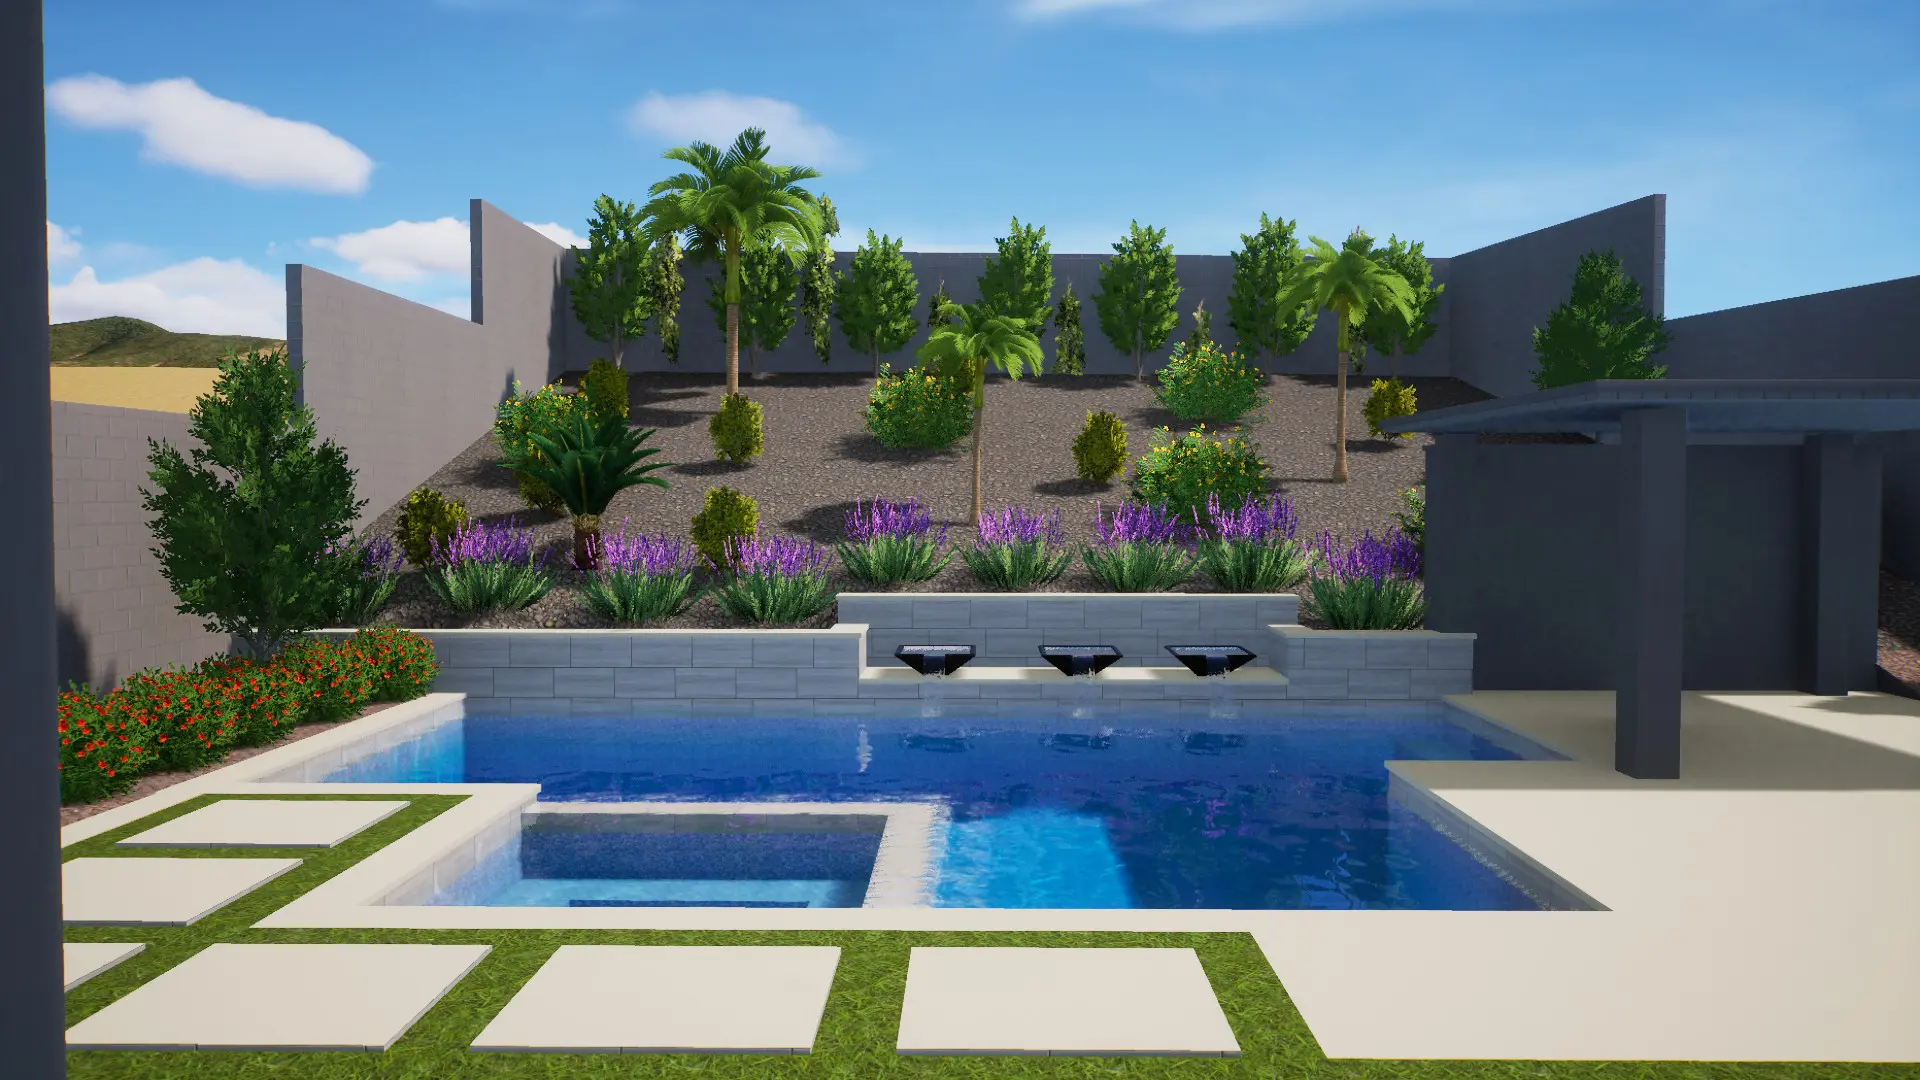 A rendering of an outdoor pool with a palm tree and purple flowers.